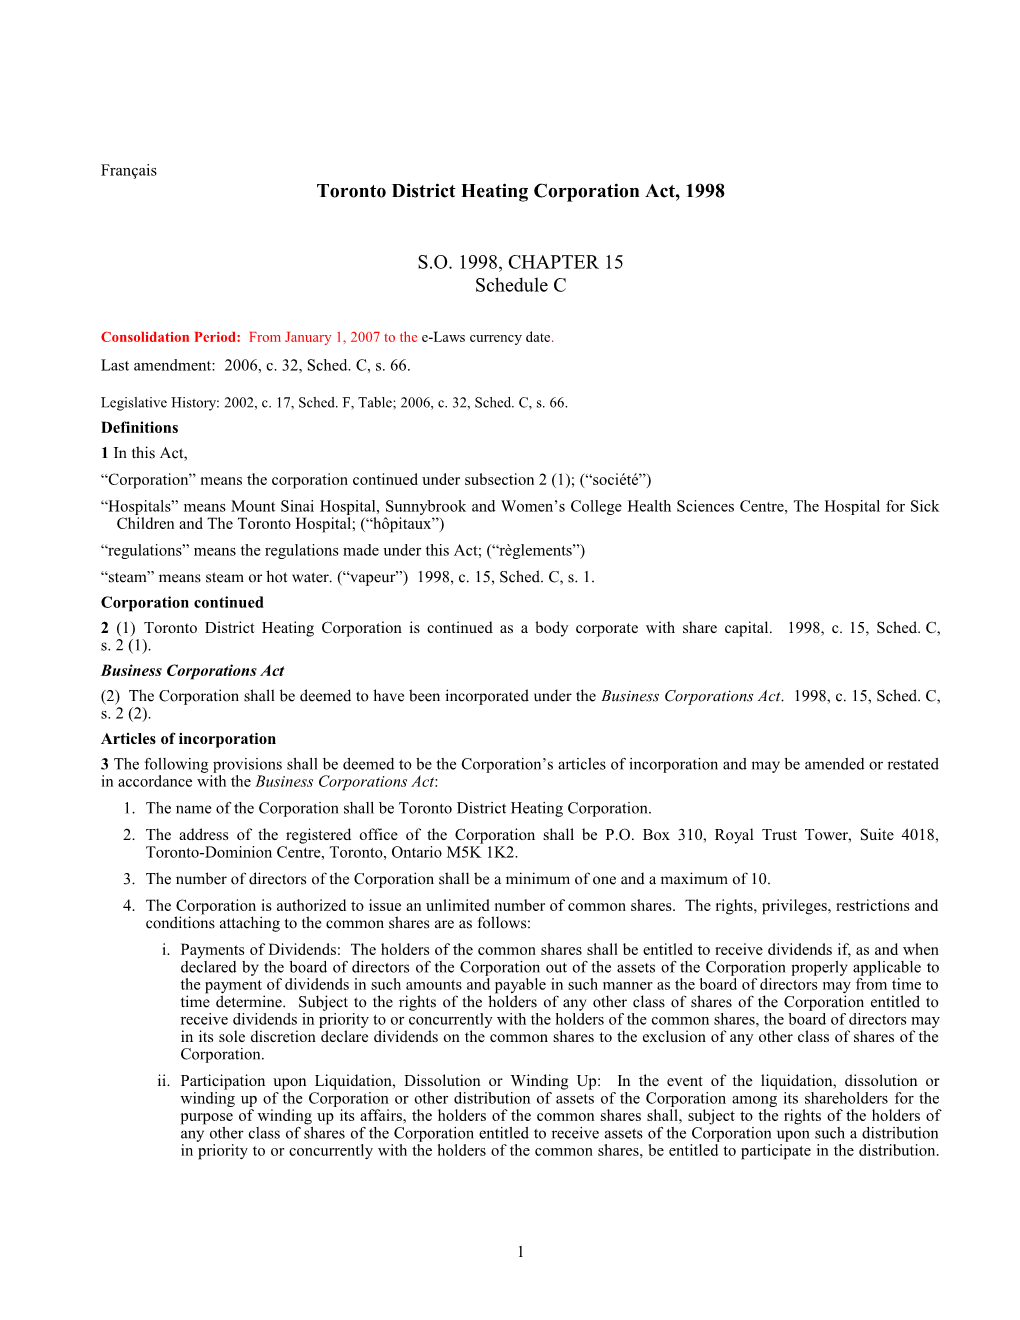 Toronto District Heating Corporation Act, 1998, S.O. 1998, C. 15, Sched. C